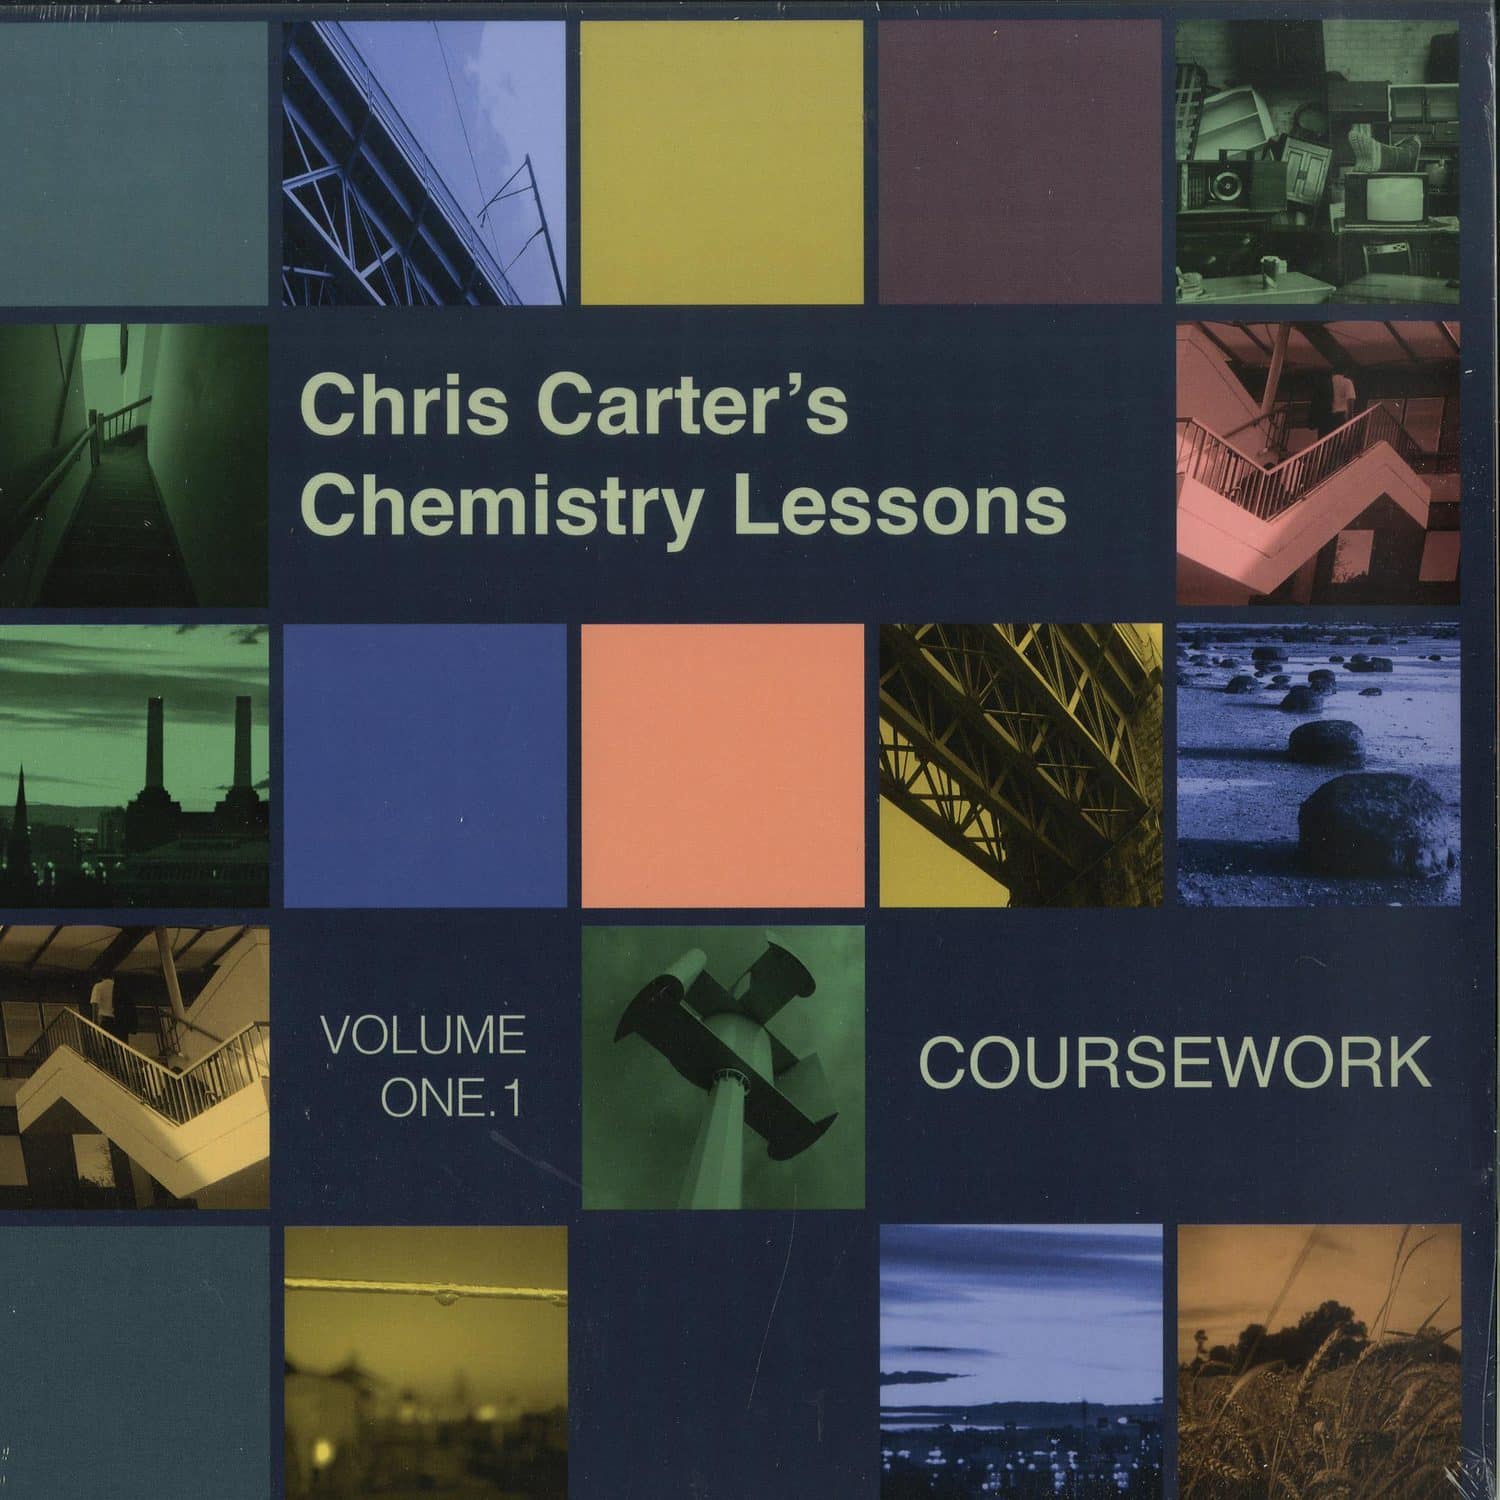 Chris Carter - CHEMISTRY LESSONS VOLUME ONE 1: COURSEWORK 